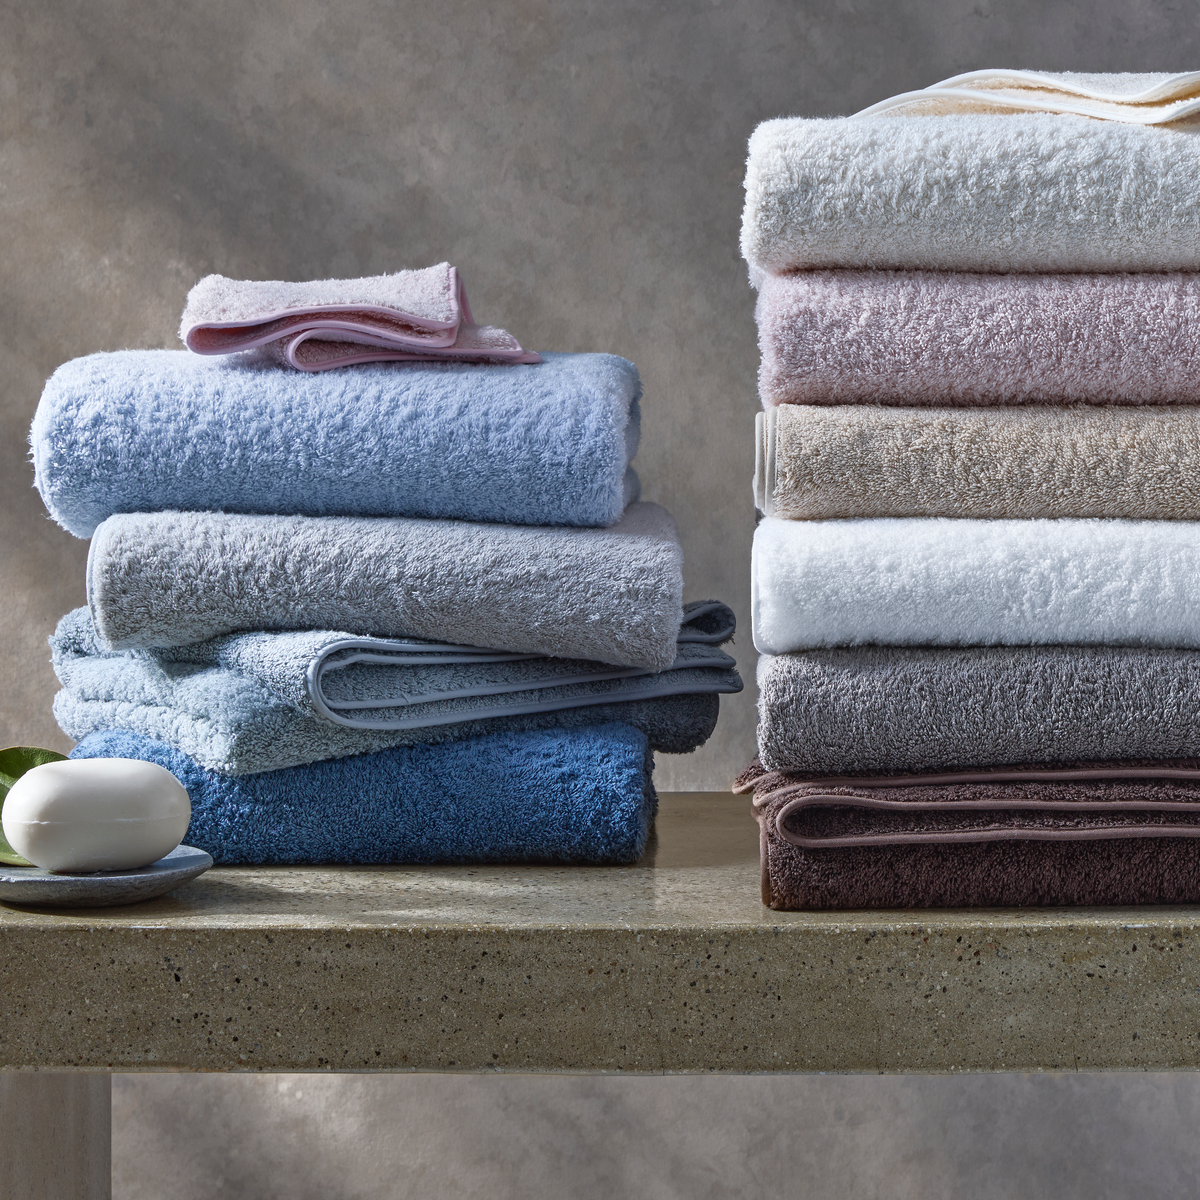 Stack of All Solid Colors of Matouk Cairo Bath Towels